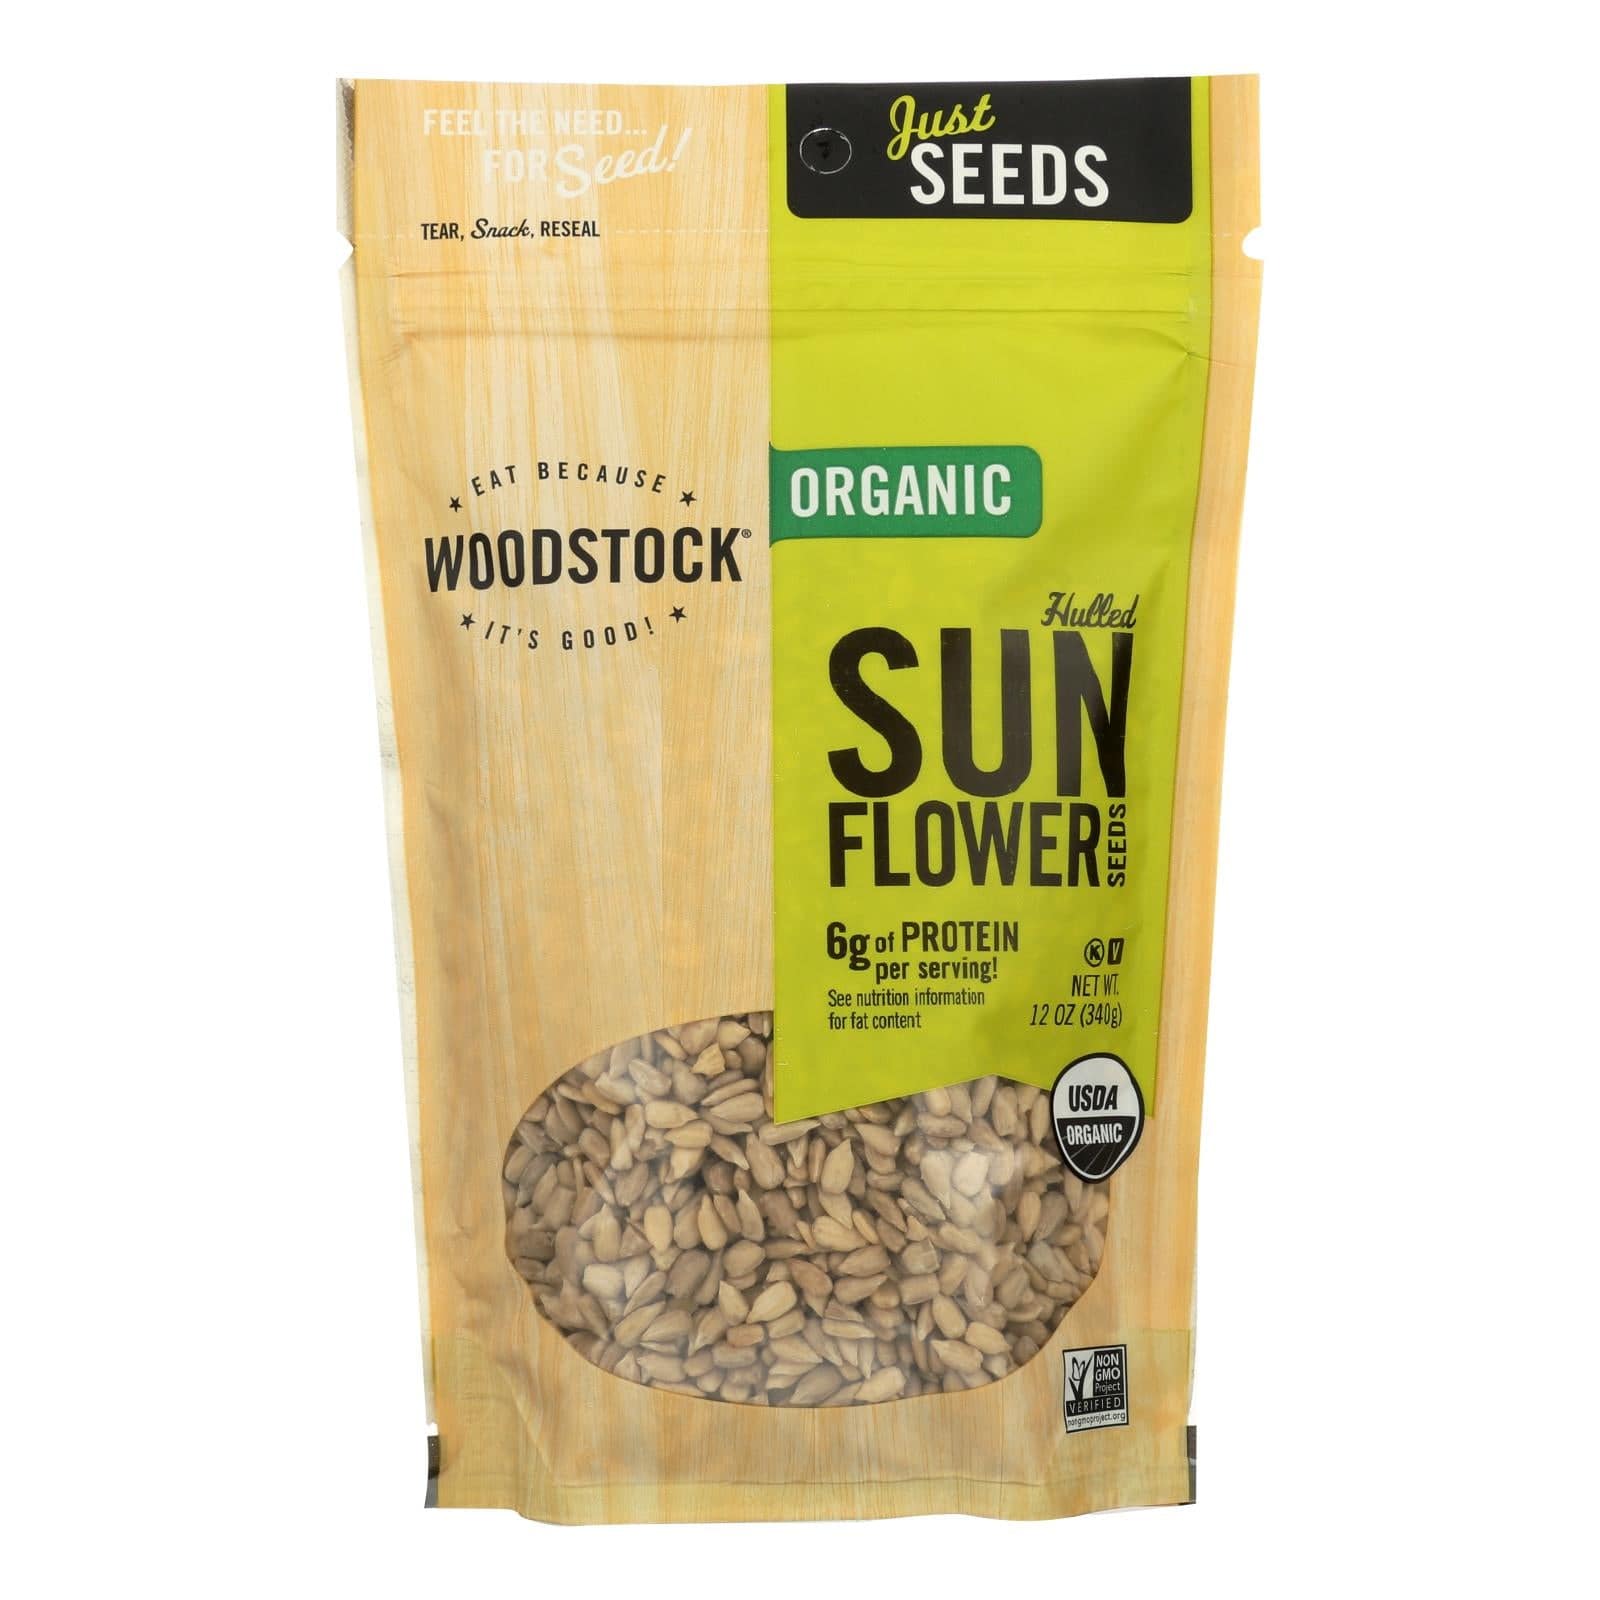 Woodstock Organic Hulled And Unsalted Sunflower Seeds - Case Of 8 - 12 Oz | OnlyNaturals.us